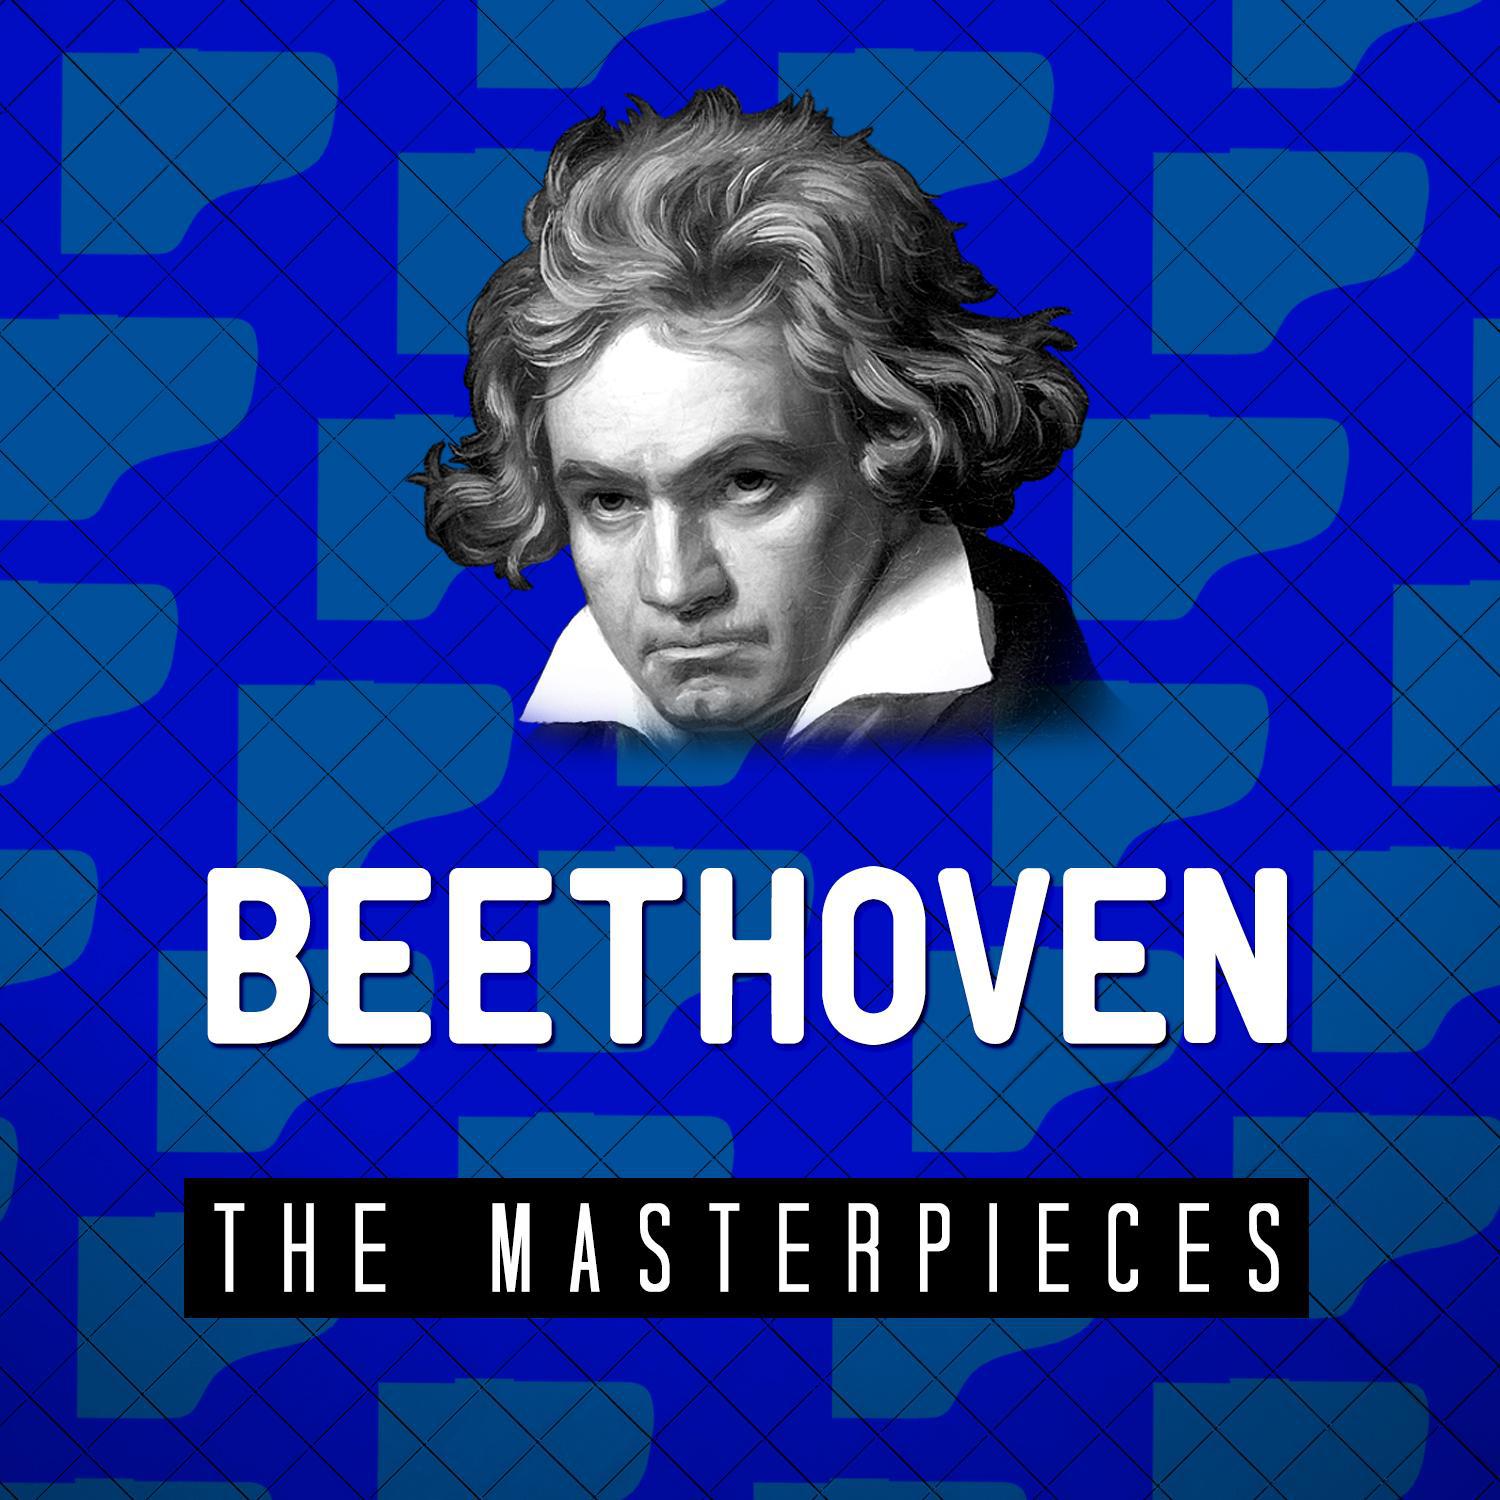 Beethoven - The Masterpieces